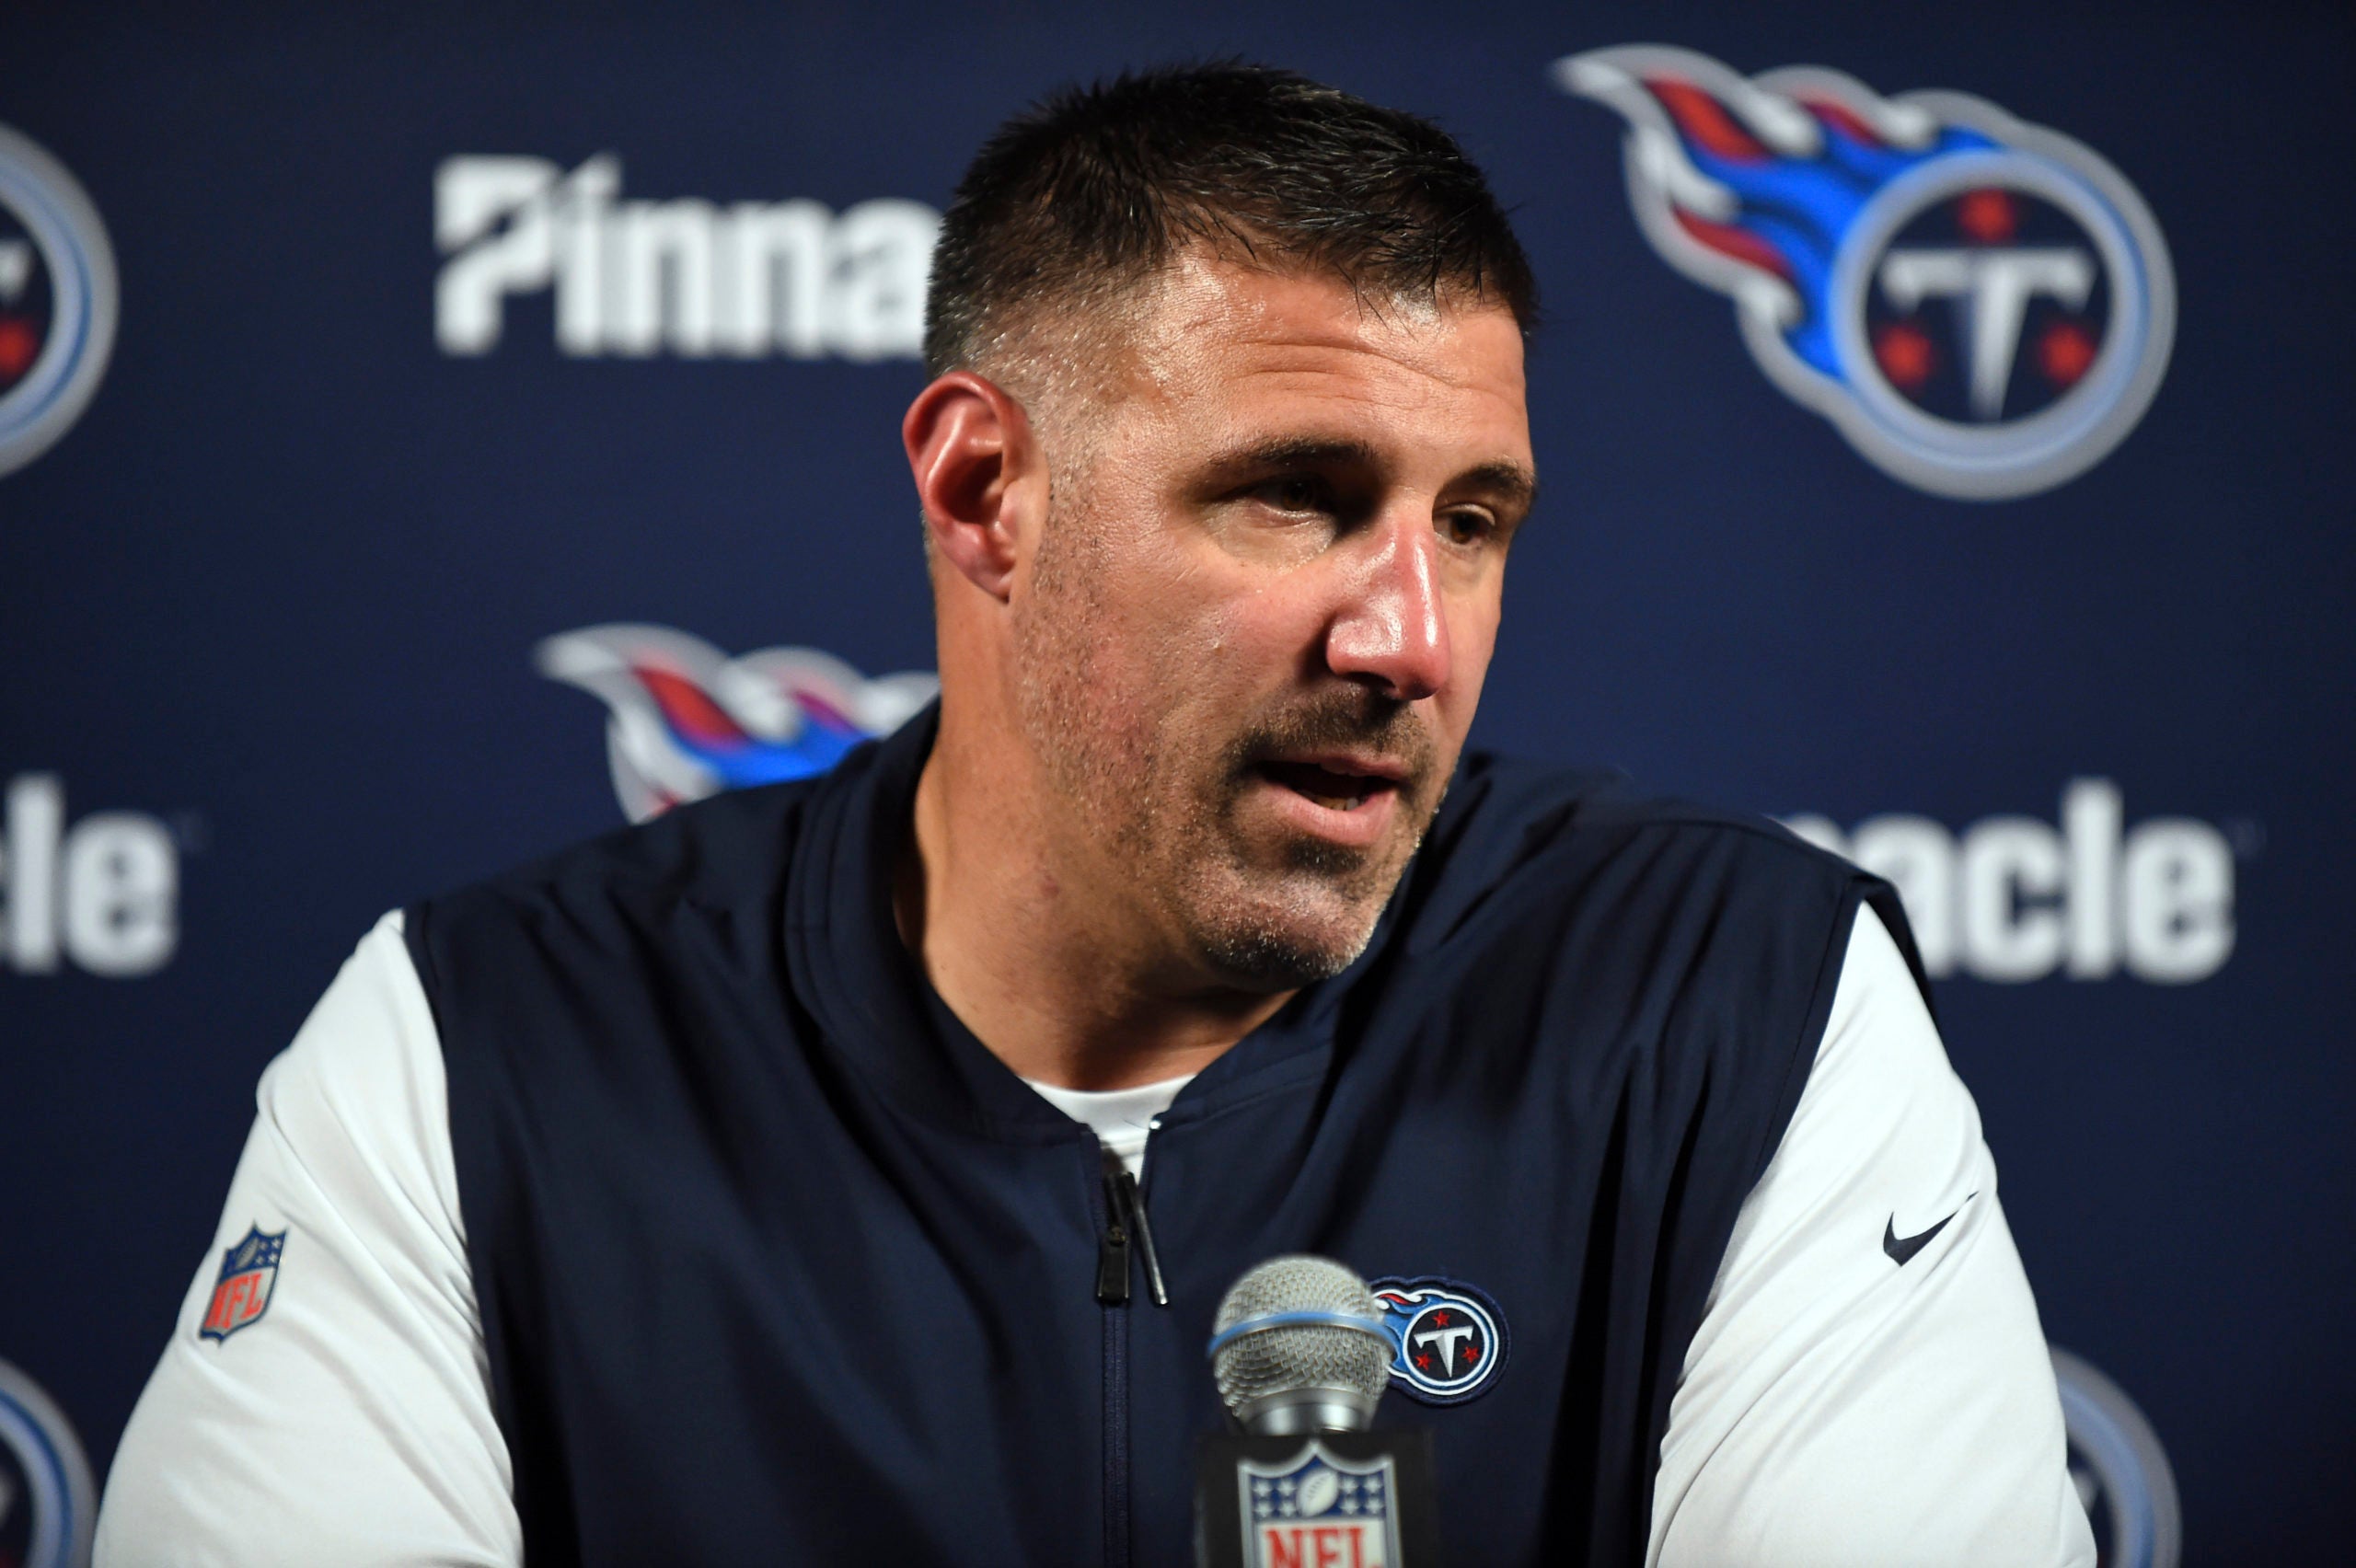 Morning sports update Mike Vrabel said the Titans are going into the